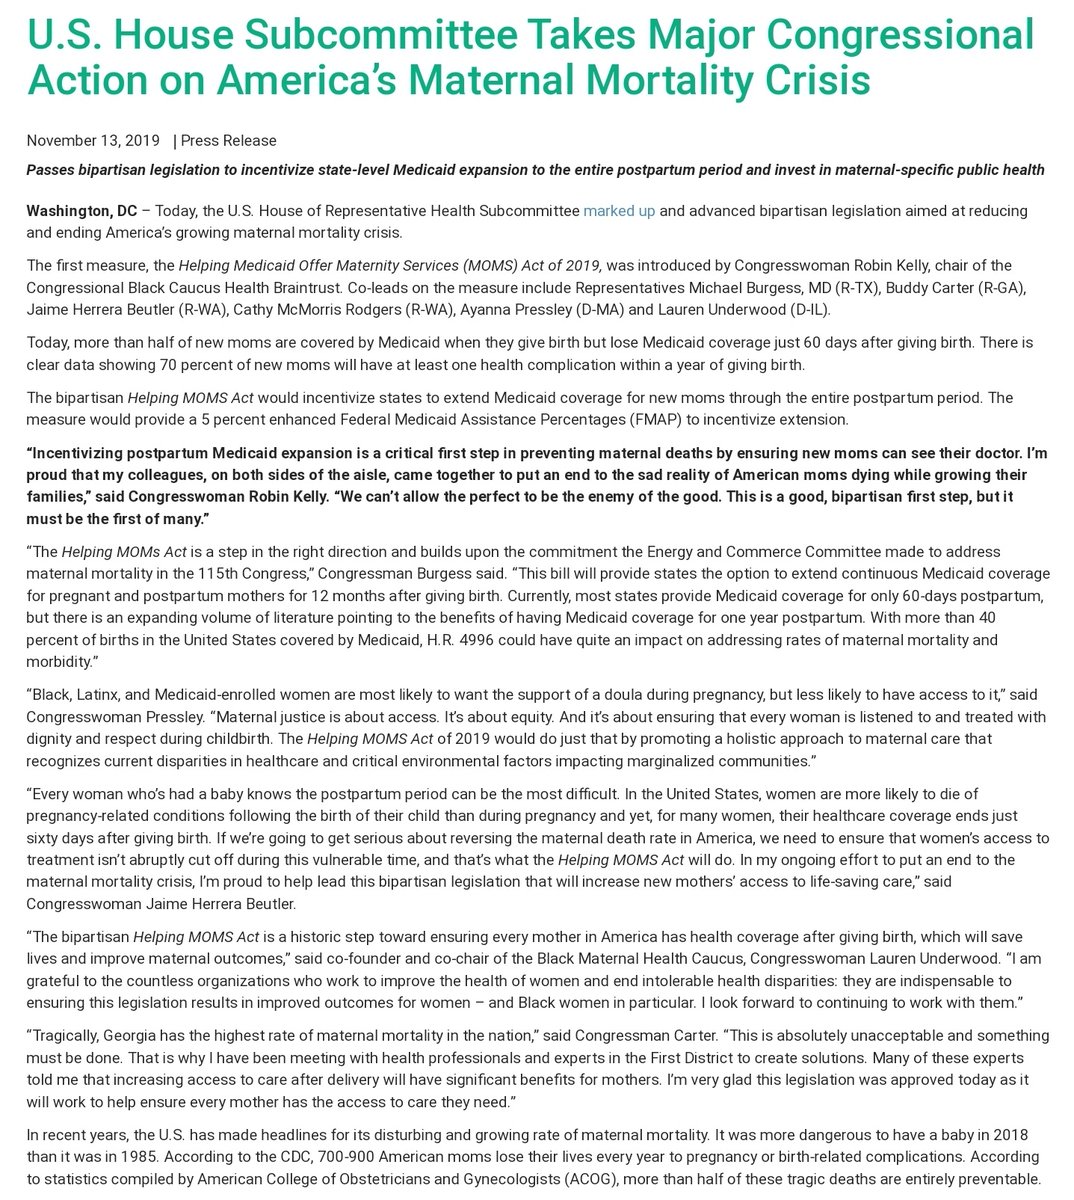 Helping Medicaid Offer Maternity Services (MOMS) Act of 2019 introduced by Rep. Robin Kelly & co-lead by Rep. Lauren Underwood, Rep. Ayanna Pressley et all passed in the House Health Subcommittee. The bill incentivizes postpartum Medicaid expansion.  #BlackMaternalHealthWeek 11/